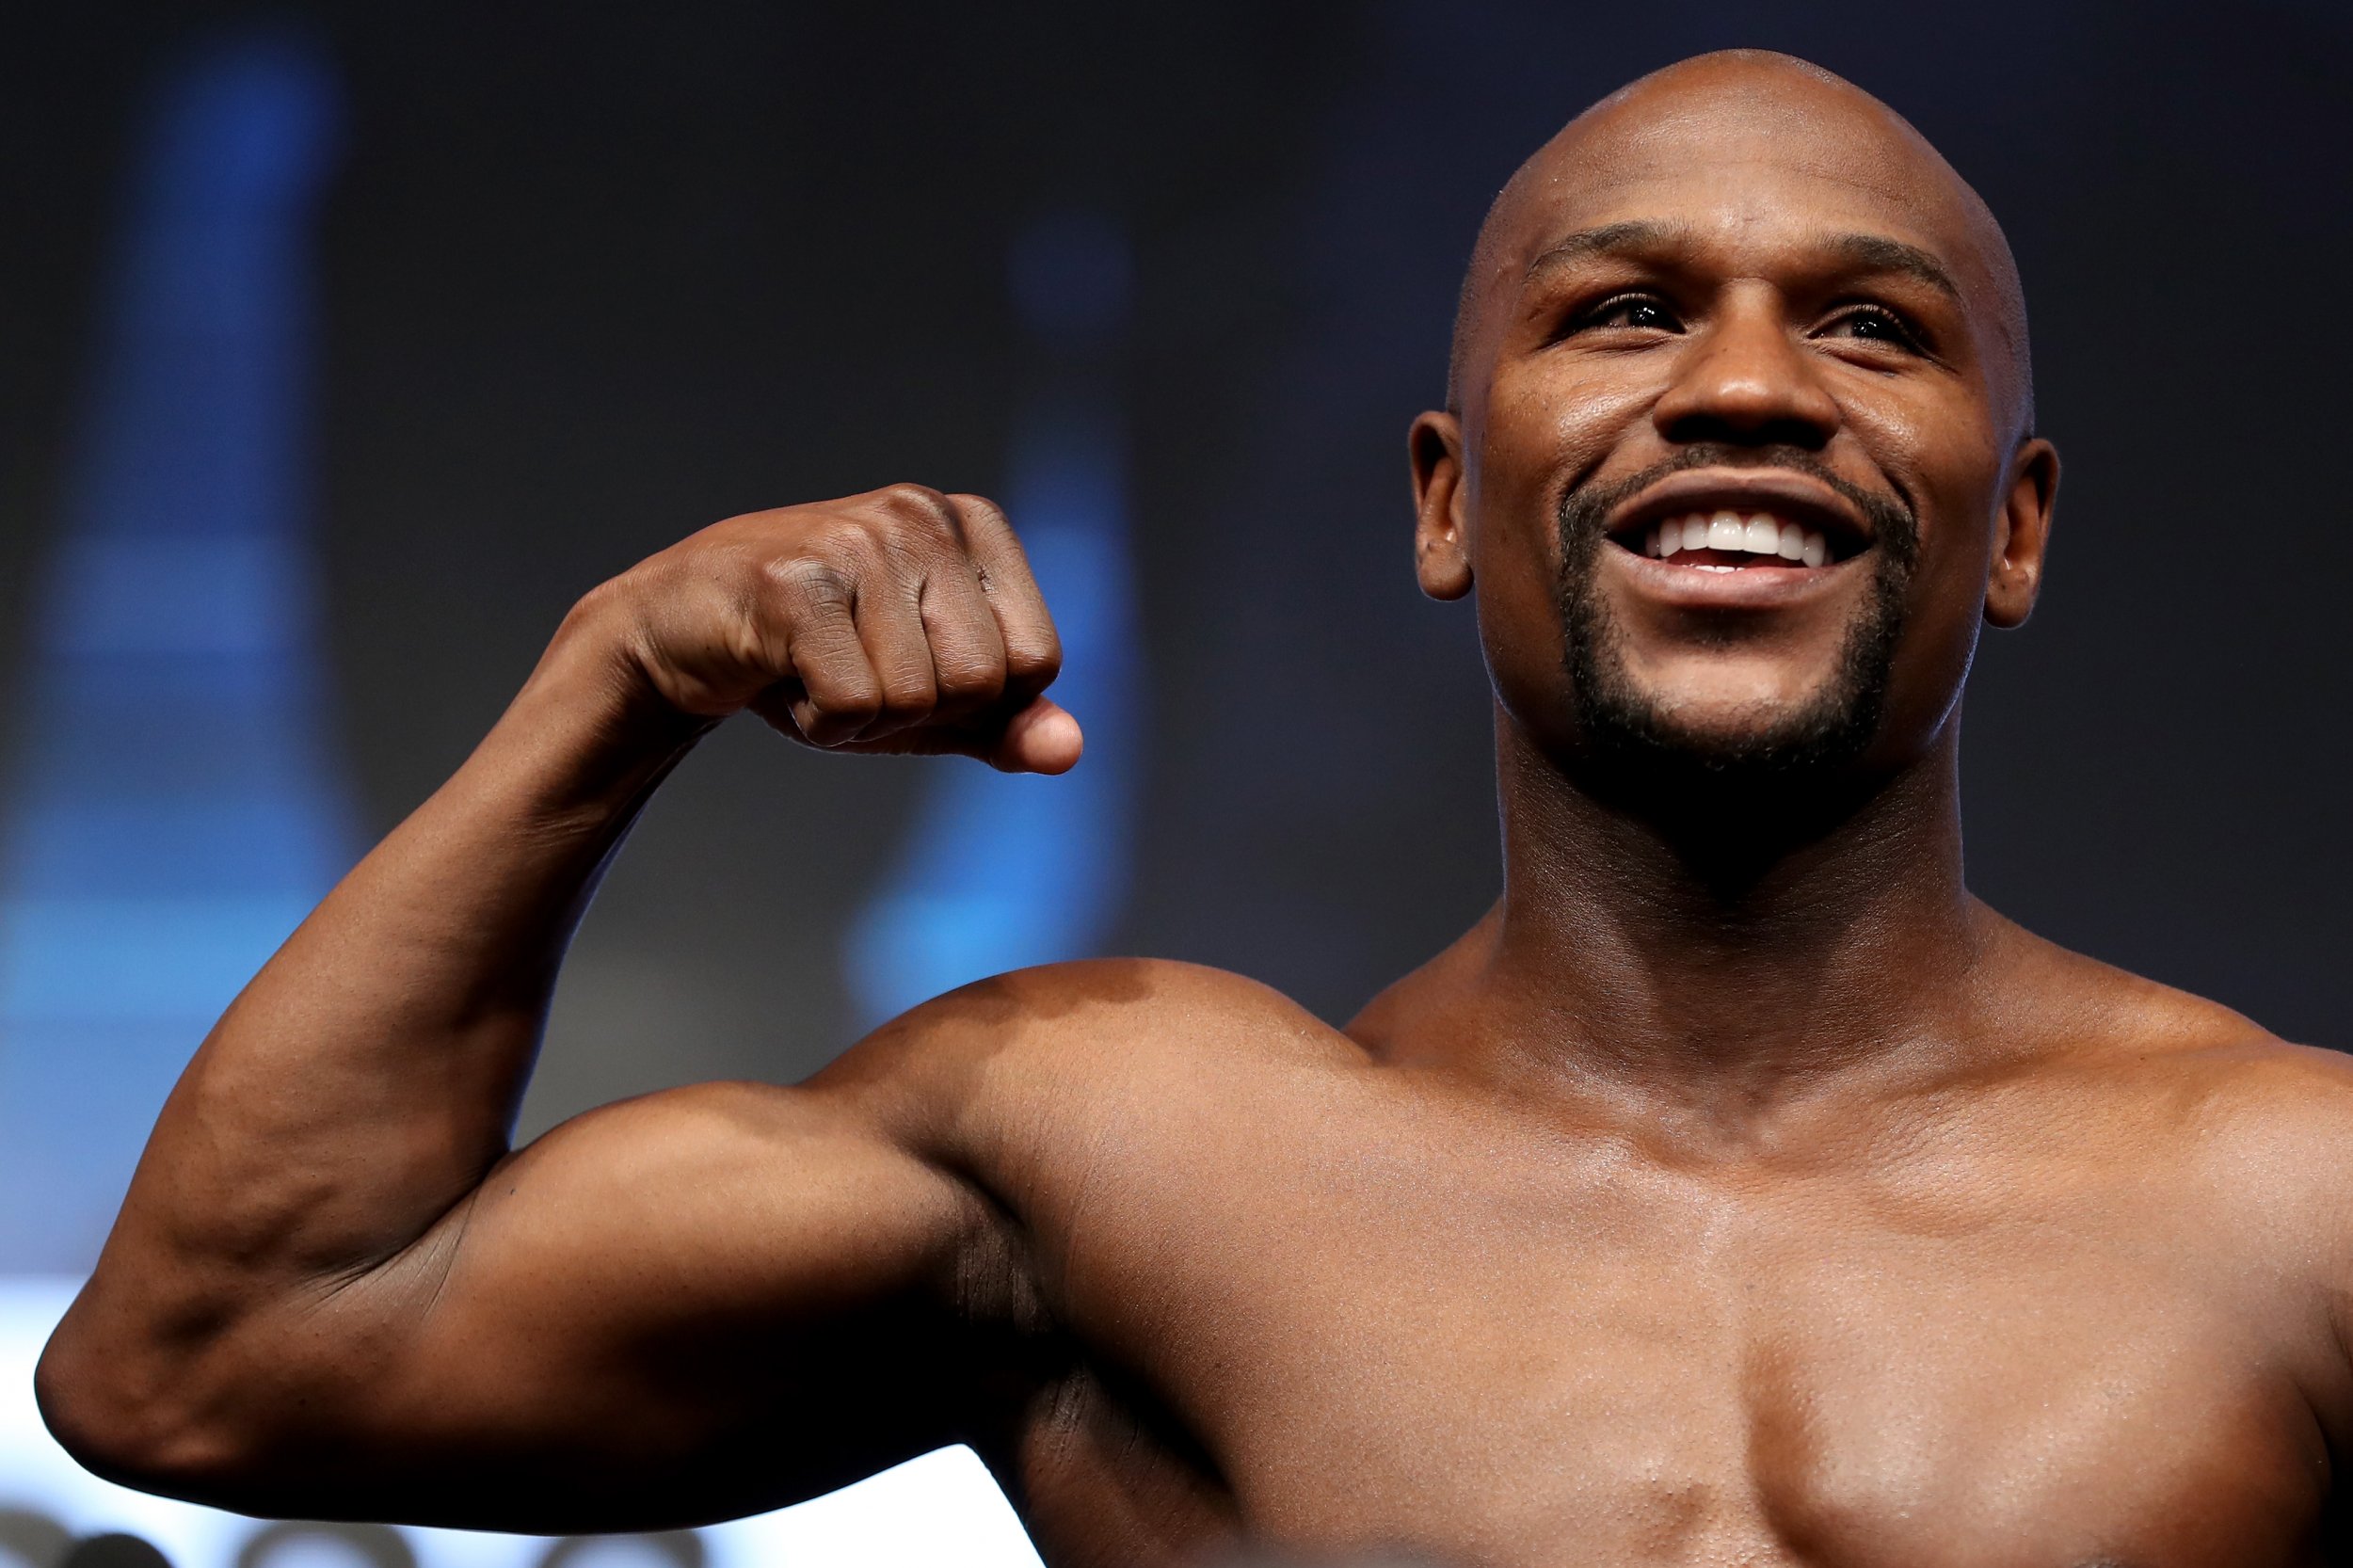 Floyd Mayweather ‘targeting TWO bouts in 2020’ After Announcing Return